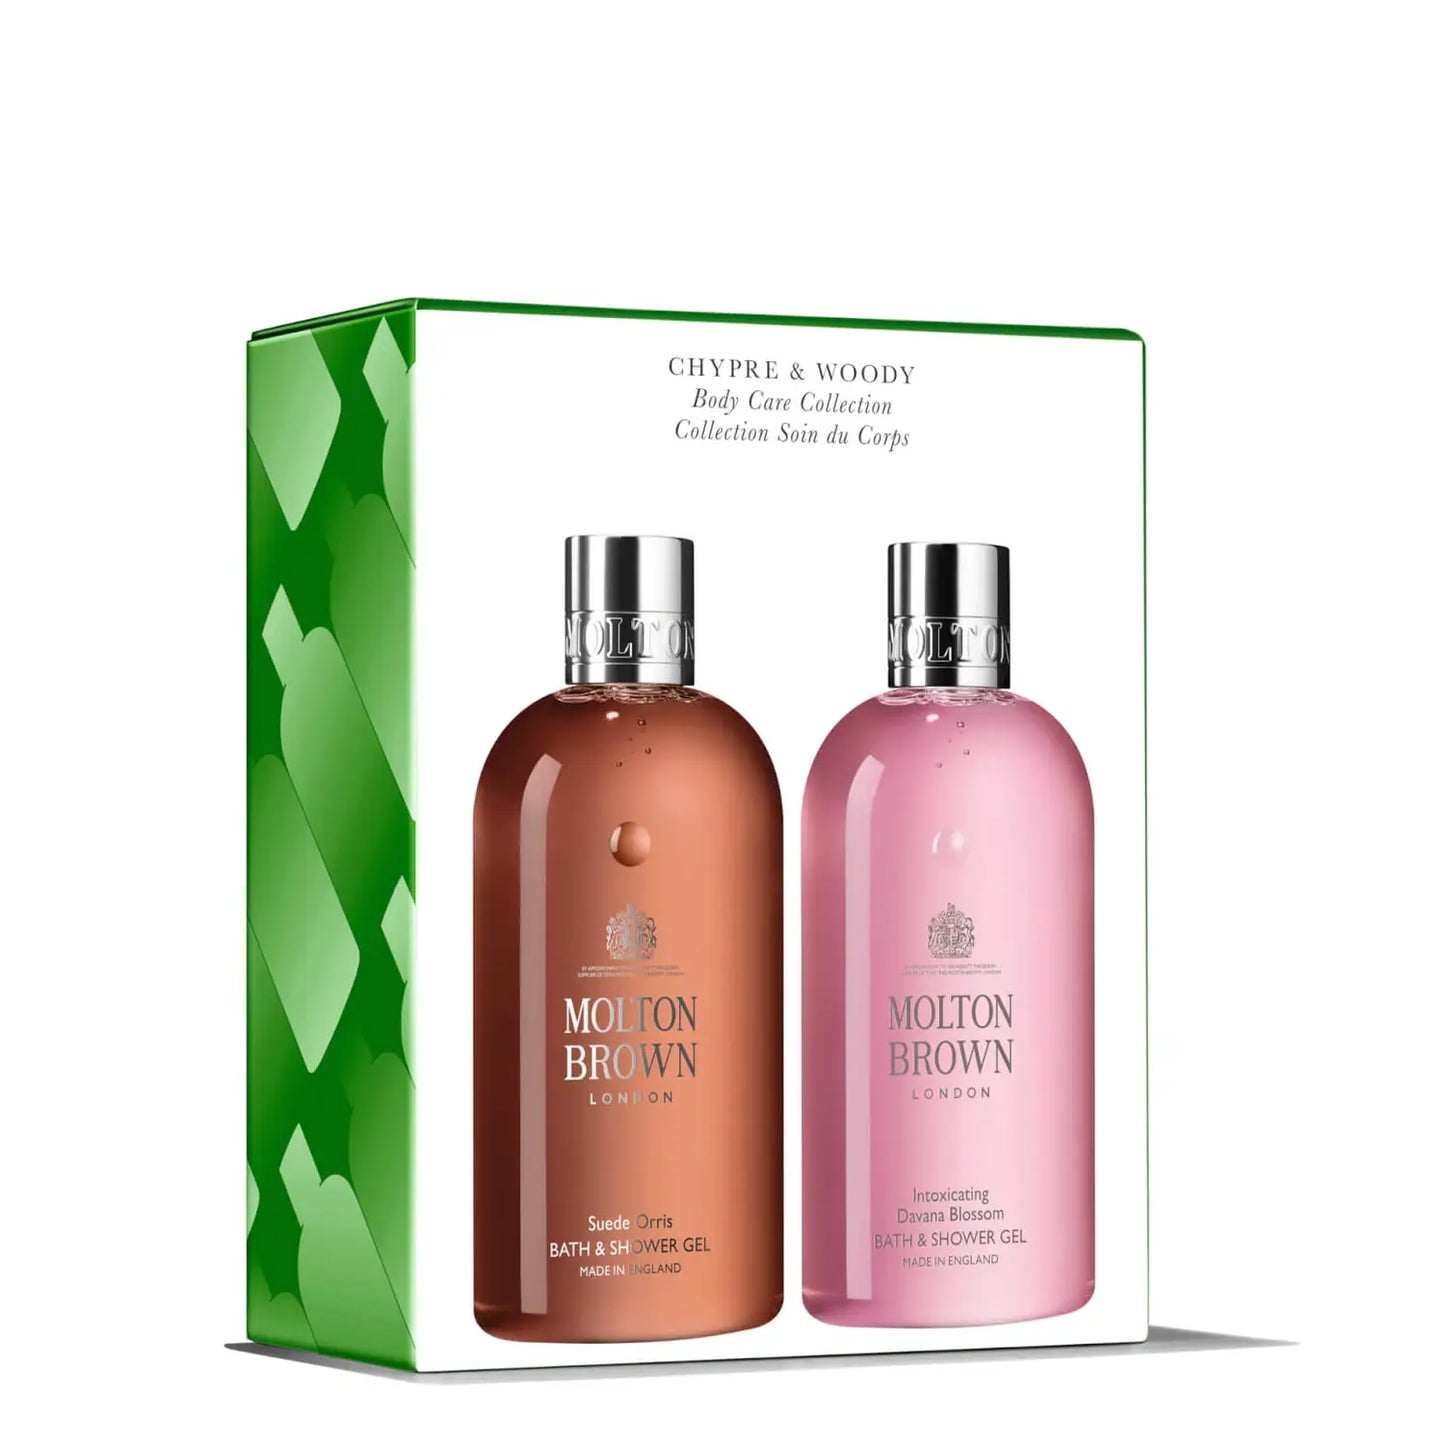 Molton Brown - Chypre and Woody Body Care Set